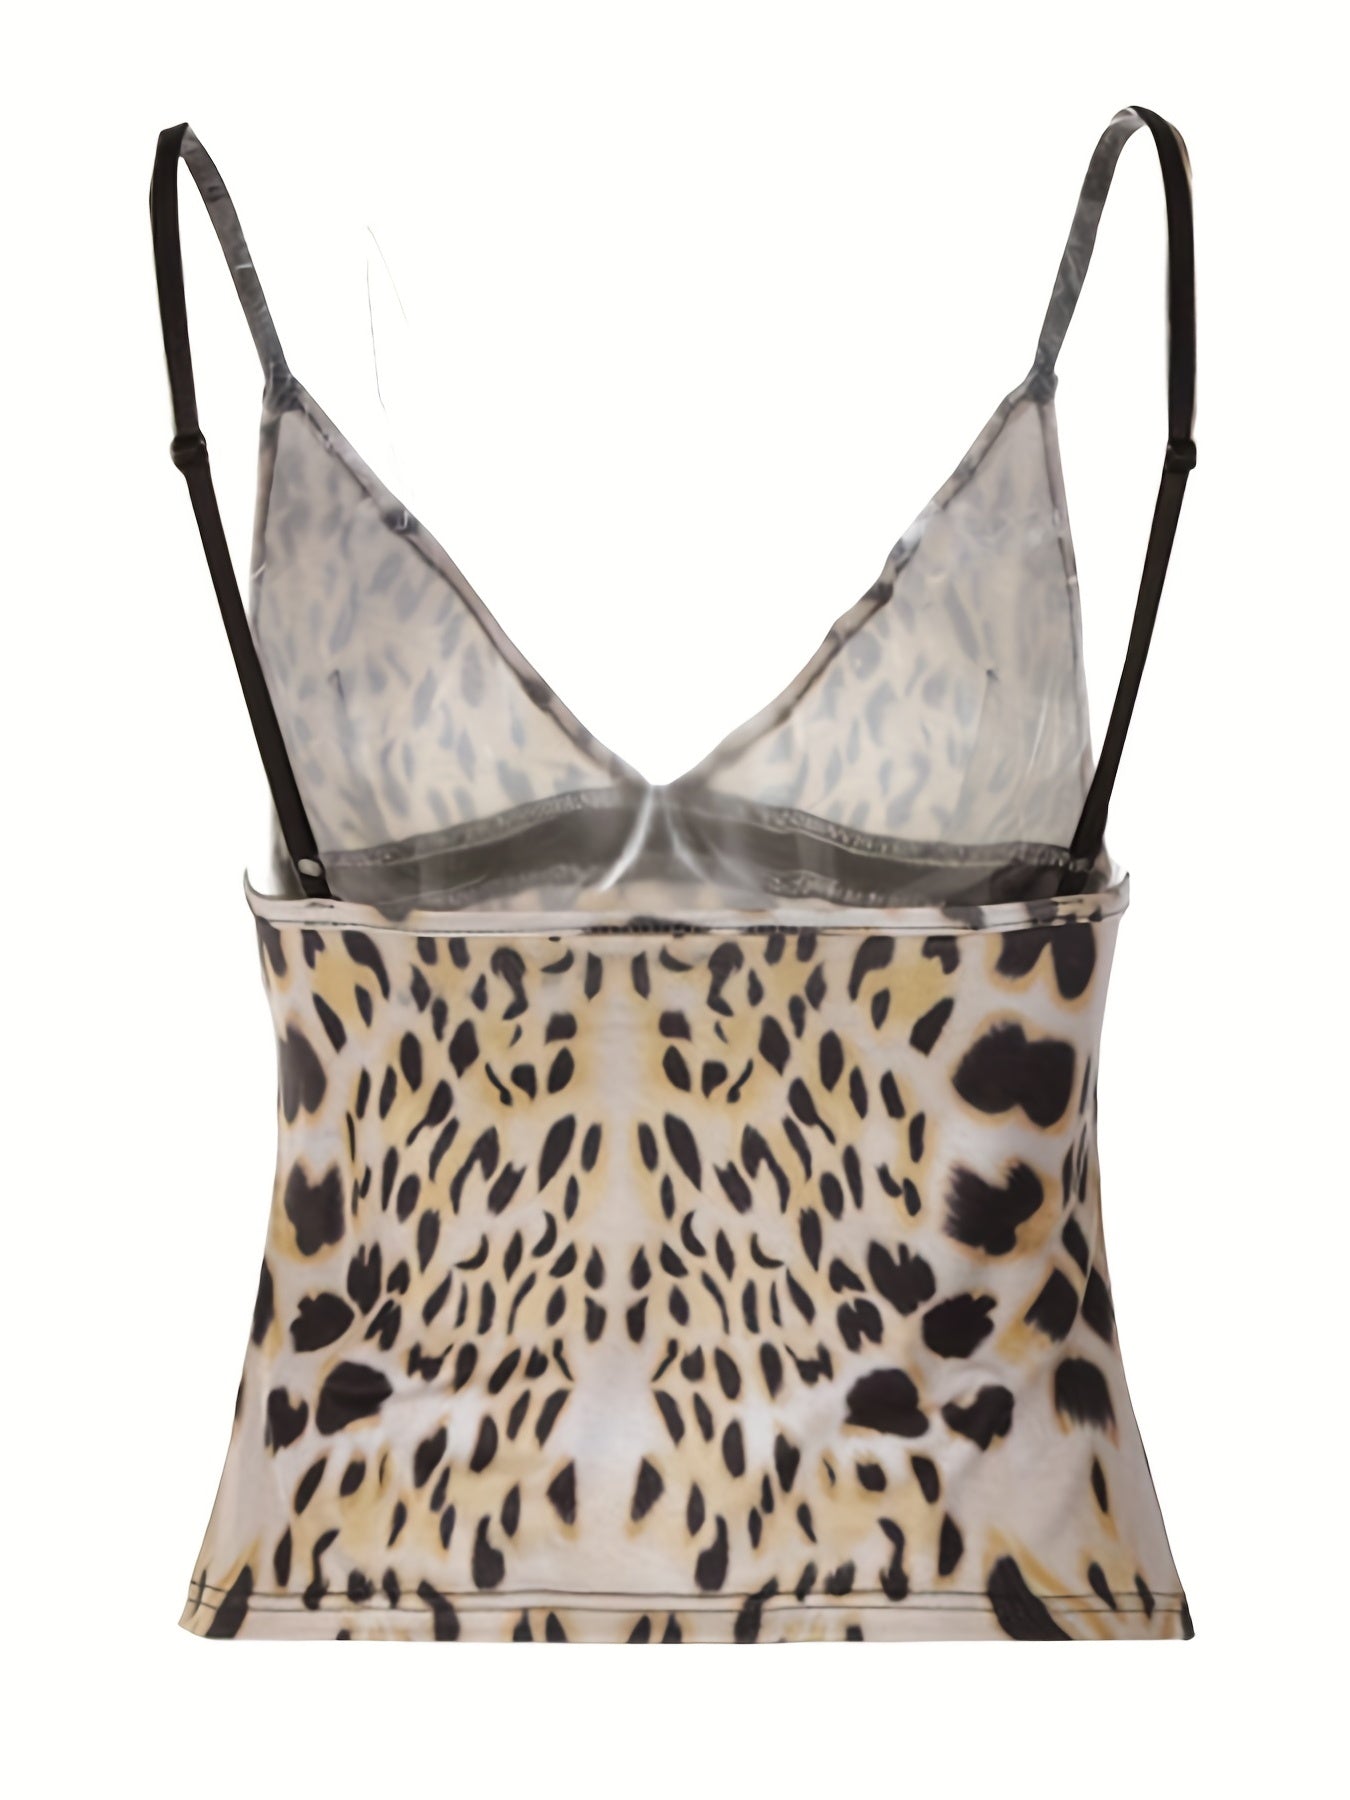 xieyinshe  Leopard Print Cami Top, Casual V Neck Summer Sleeveless Top, Women's Clothing